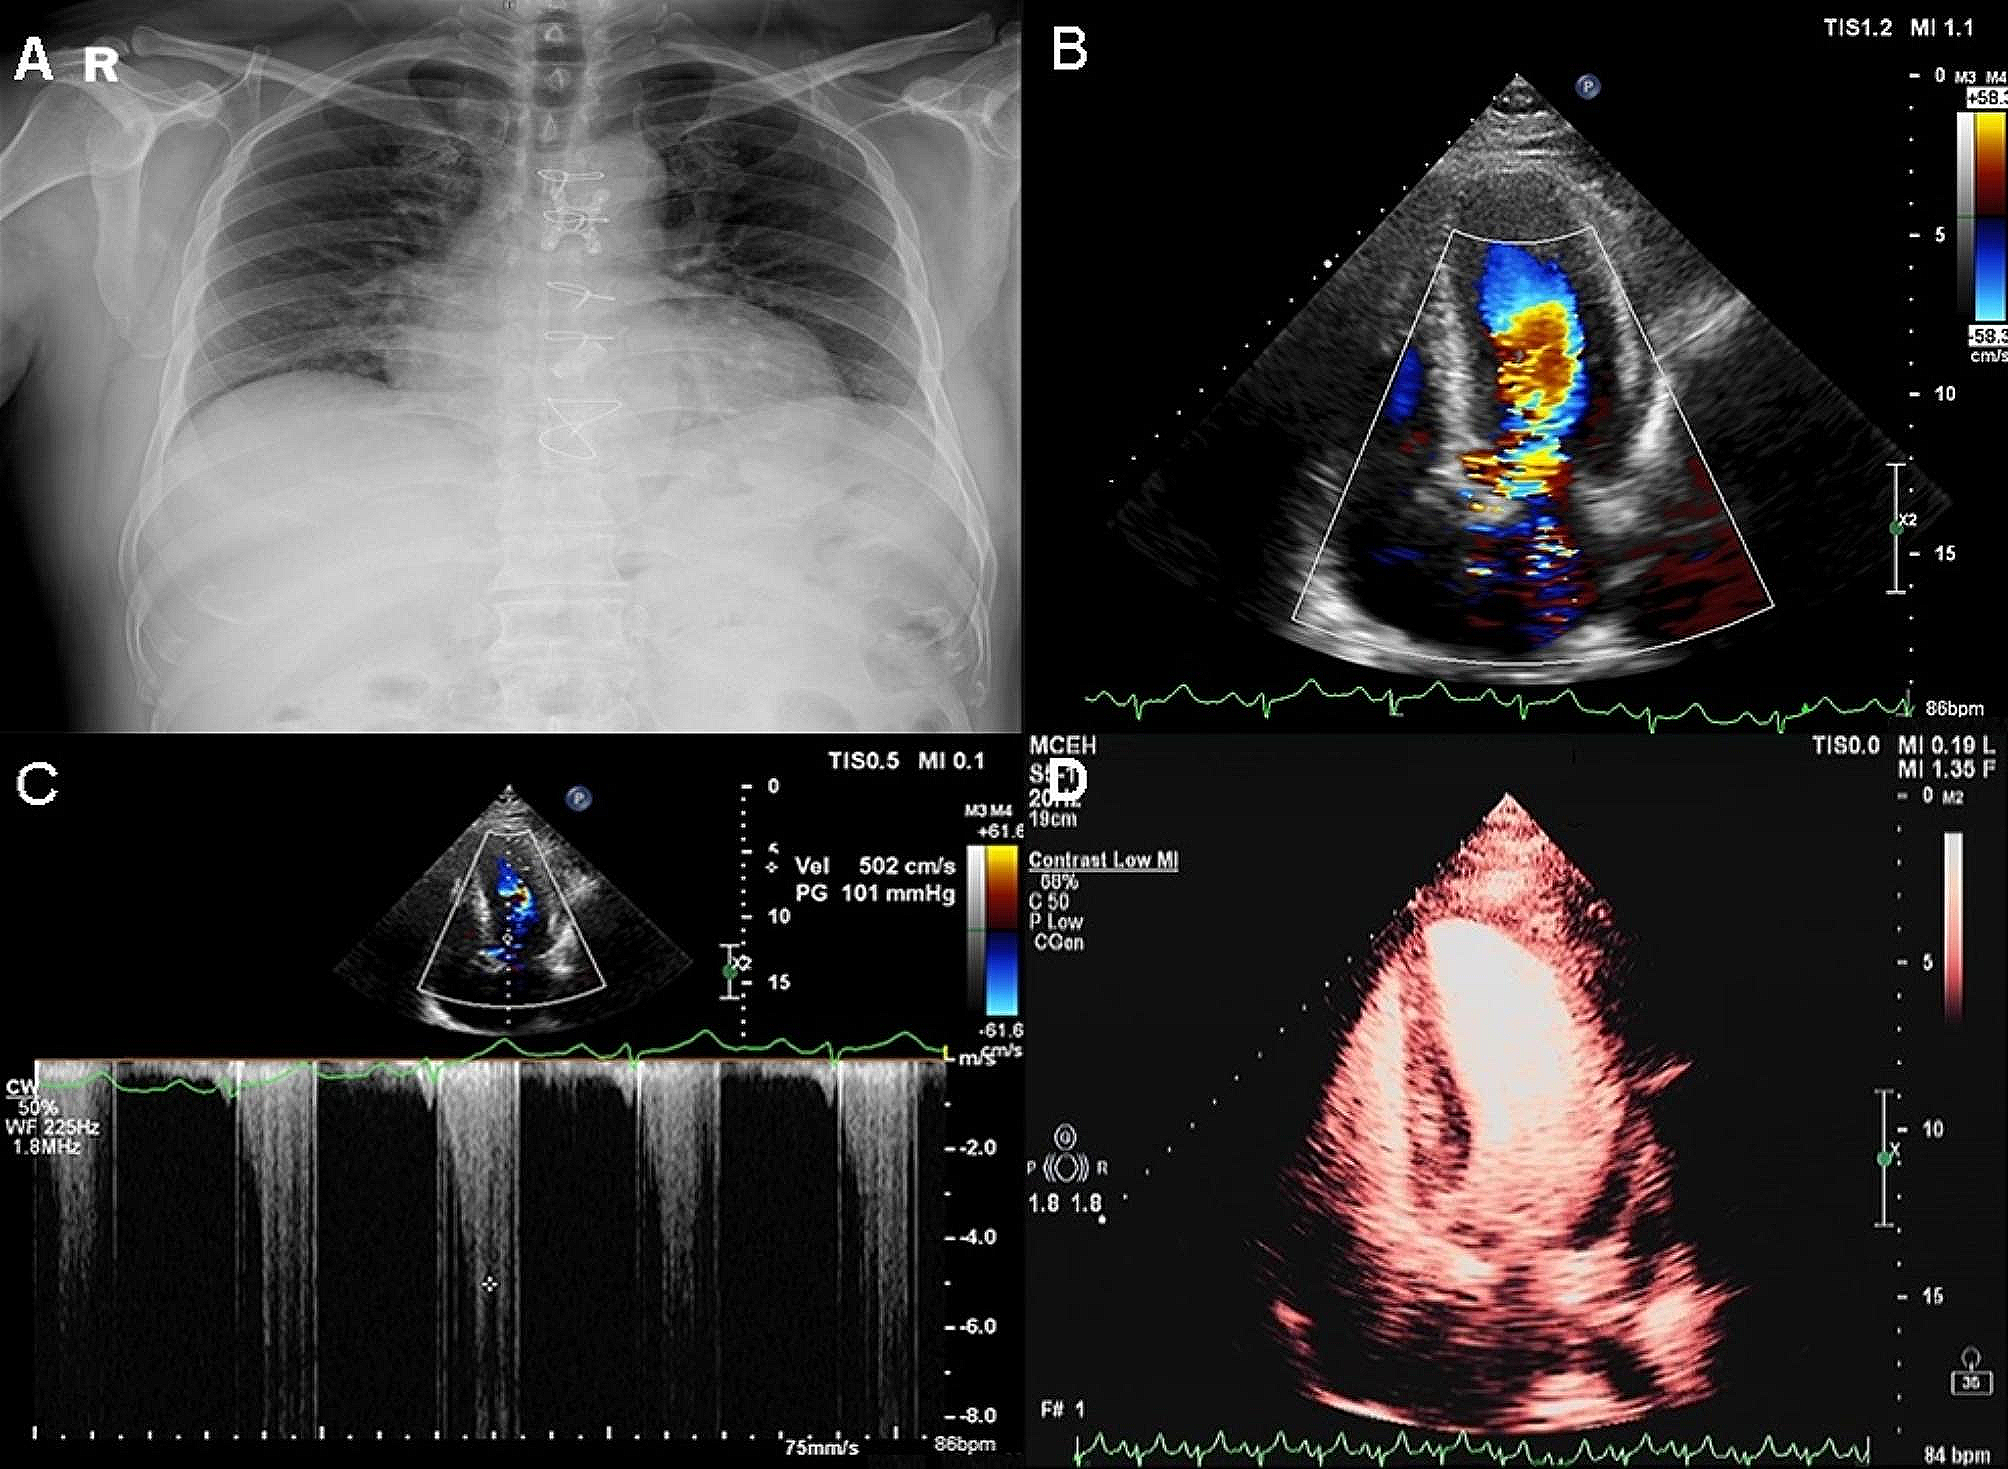 A case of hypertrophic cardiomyopathy with previous aortic valve replacement